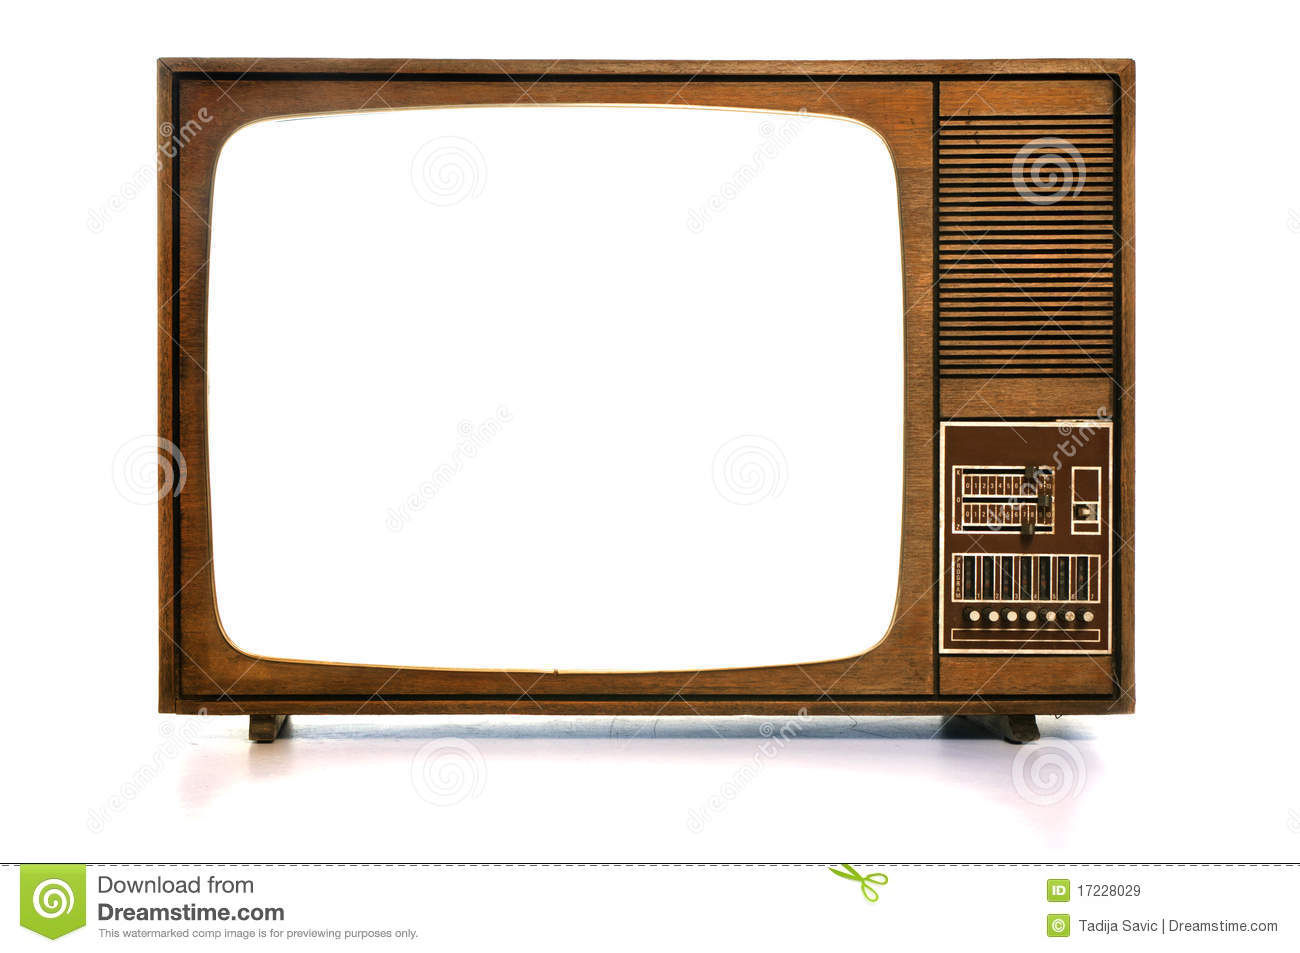 Vintage Tv Royalty Free Stock Images   Image  17228029